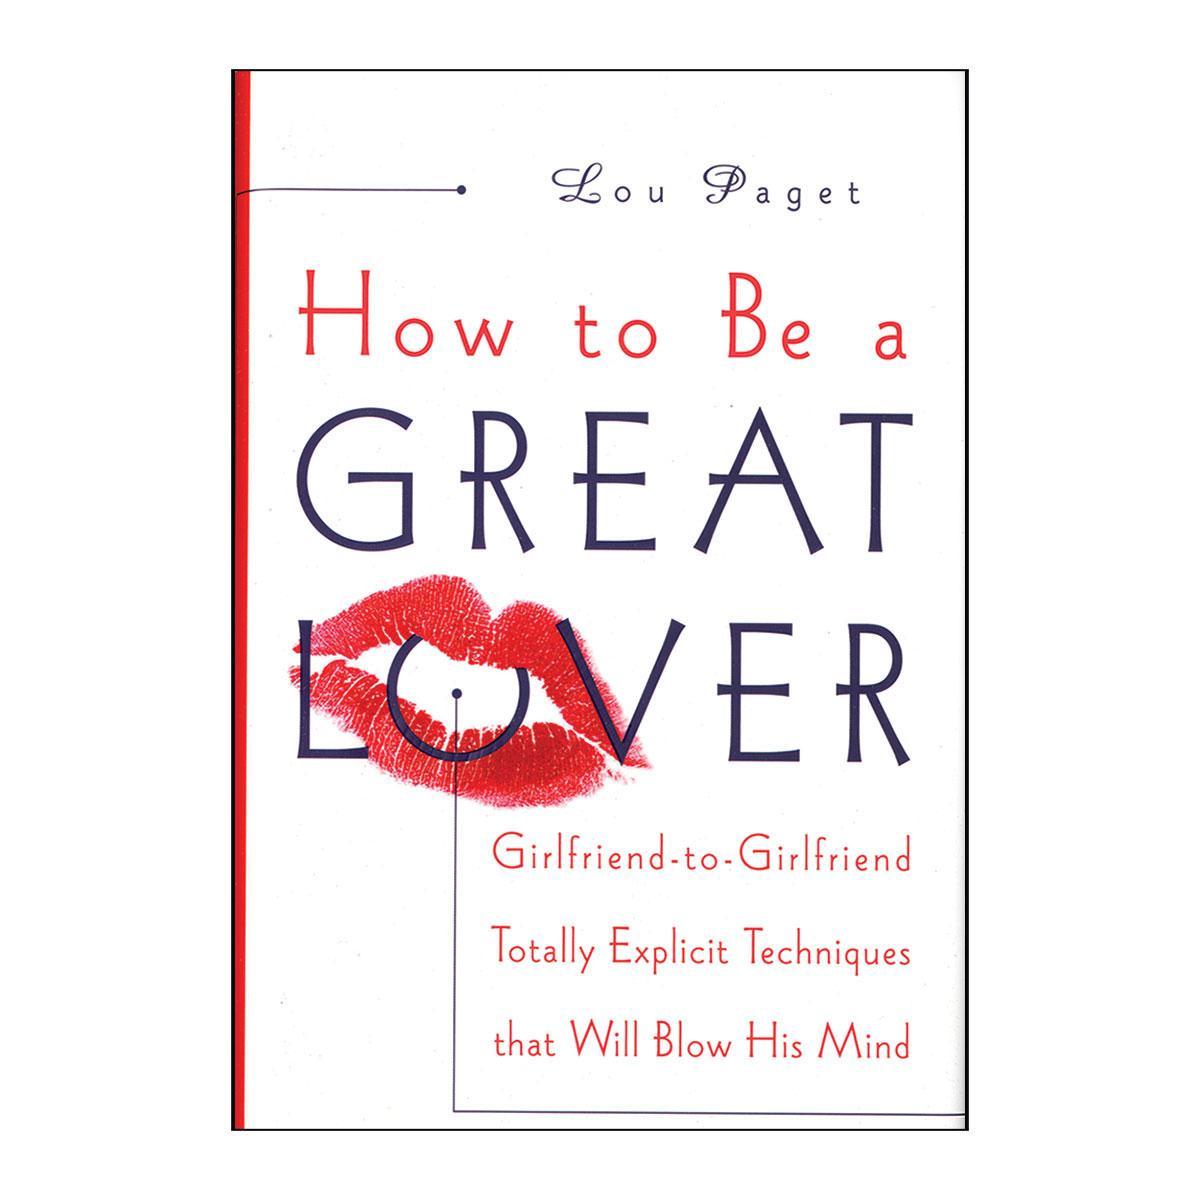 How To Be A Great Lover - Explicit Techniques that Will Blow His Mind - Books and Games